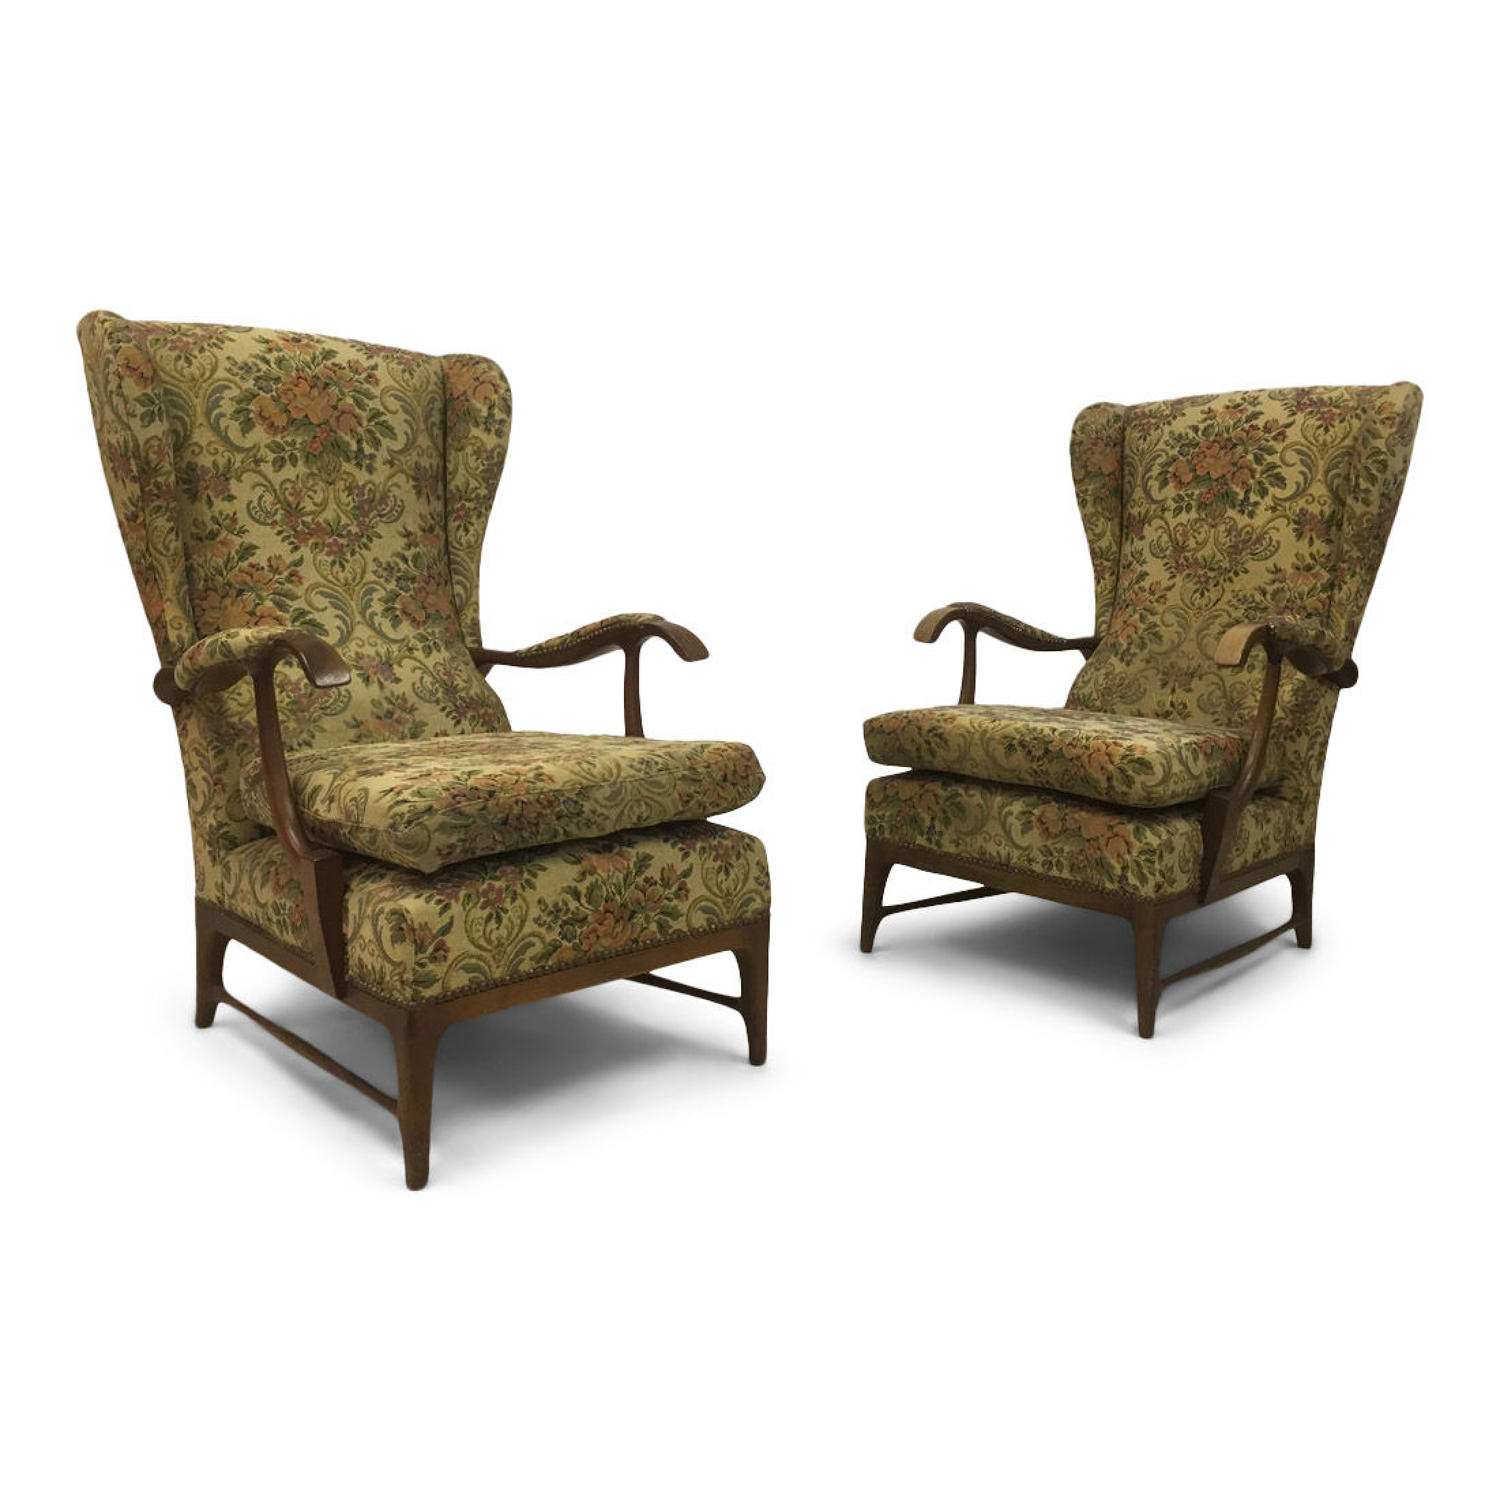 A pair of 1950s Italian armchairs by Paolo Buffa